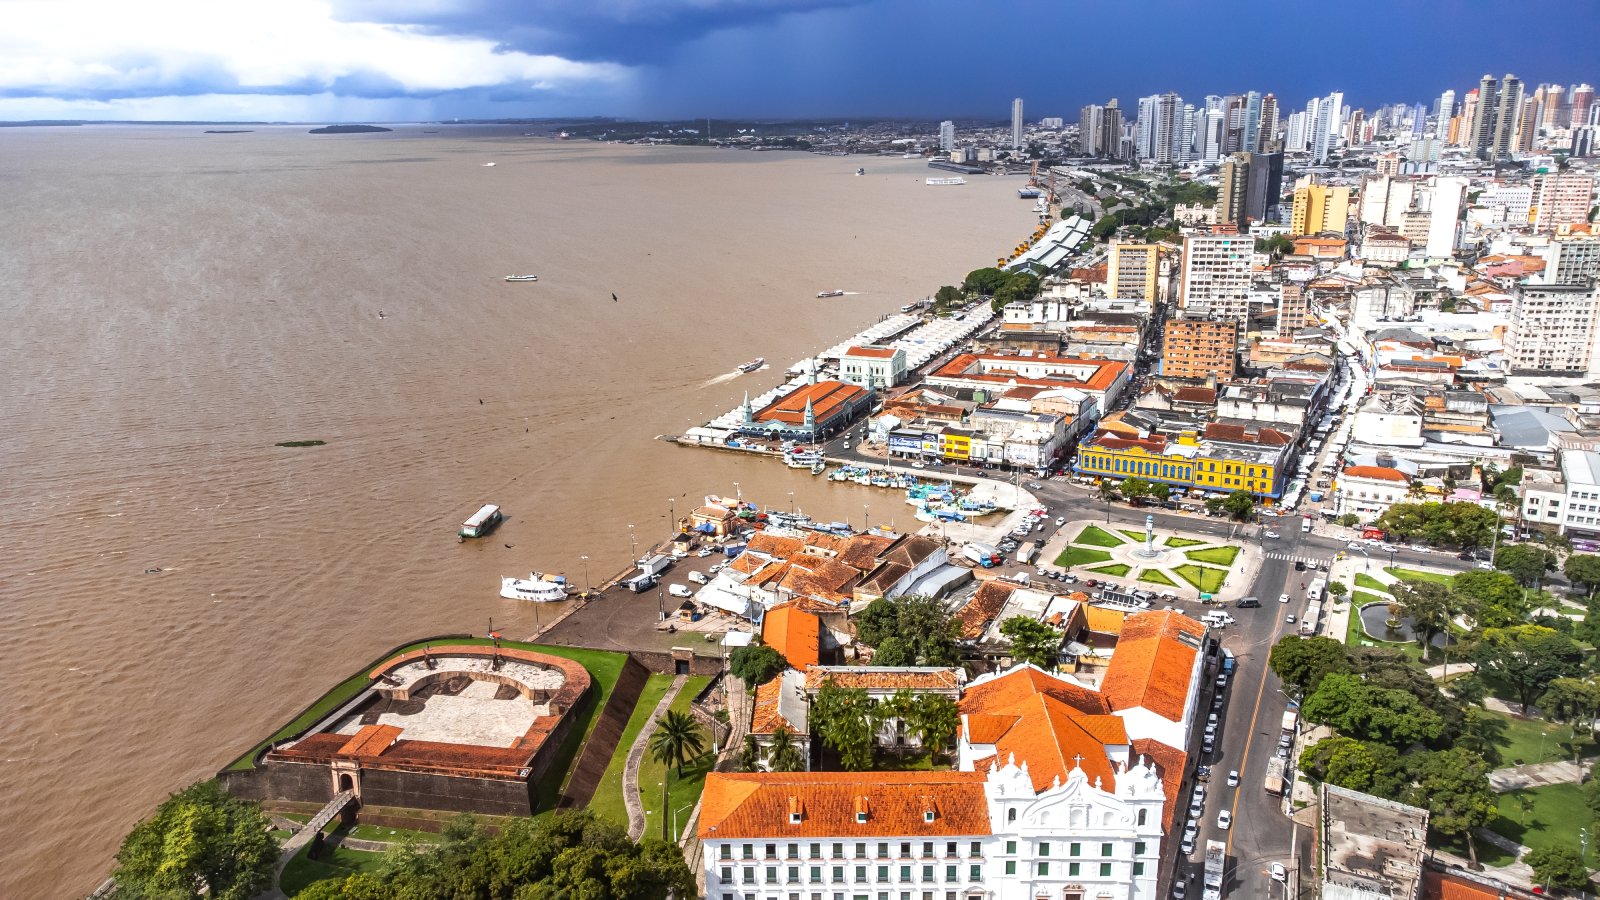 <p class="wp-caption-text">Image Credit: Shutterstock / Pedro Magrod</p>  <p><span>As the gateway to the Amazon River from the Atlantic, Belém is a vibrant city where the Amazon’s cultural and biological diversity is on full display. It is an essential stop for those looking to understand the Amazon’s urban context and its transition into the vast wilderness. The city’s markets, such as the Ver-o-Peso, offer an array of Amazonian herbs and plants used in traditional medicine, providing insight into the region’s shamanic practices.</span></p>